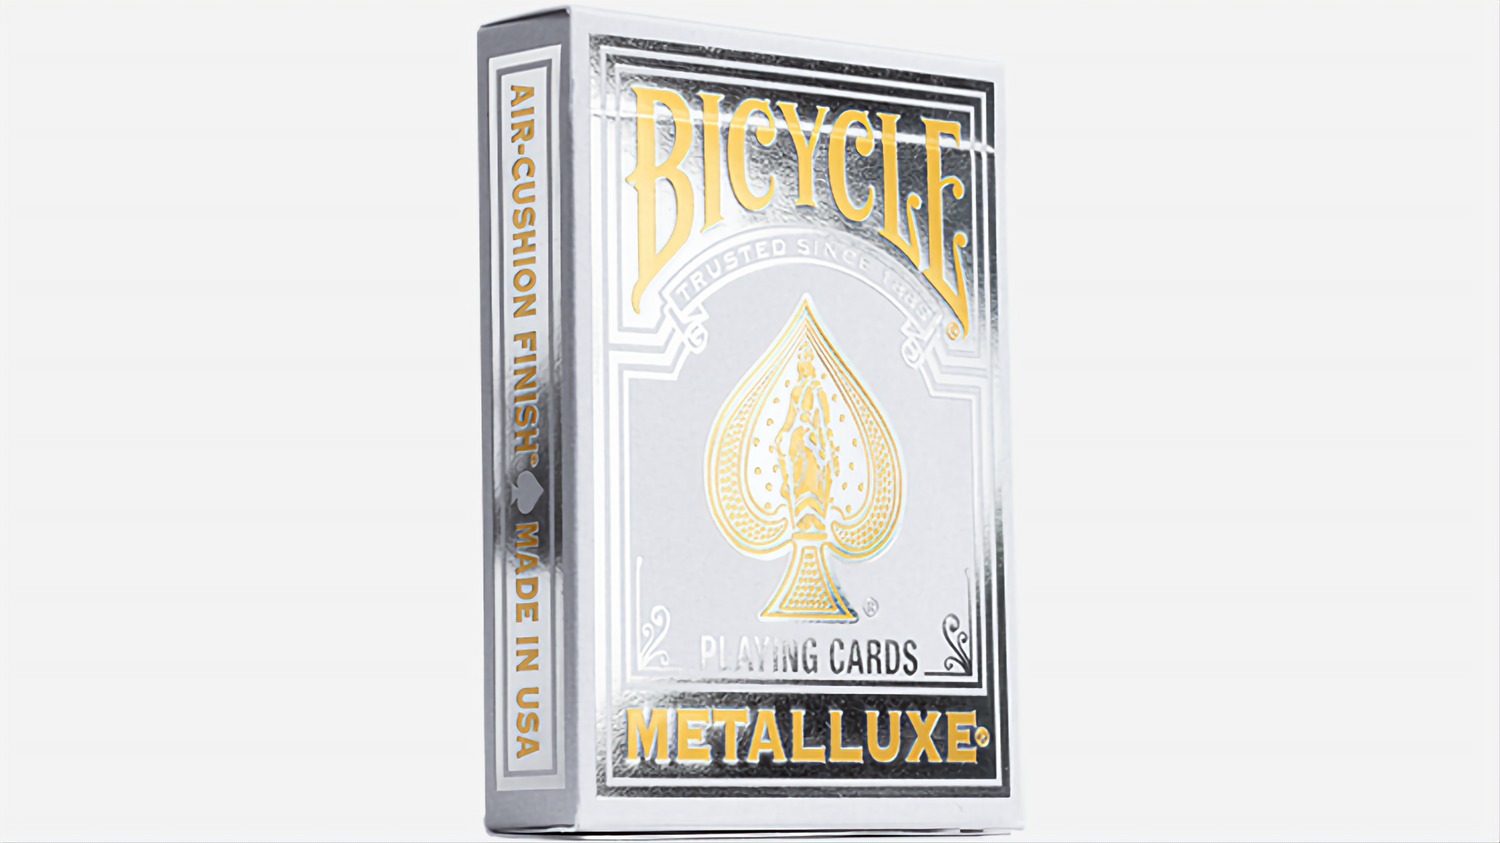 Bicycle Metalluxe Silver : Playing Cards, Poker, Magic, Cardistry,singapore